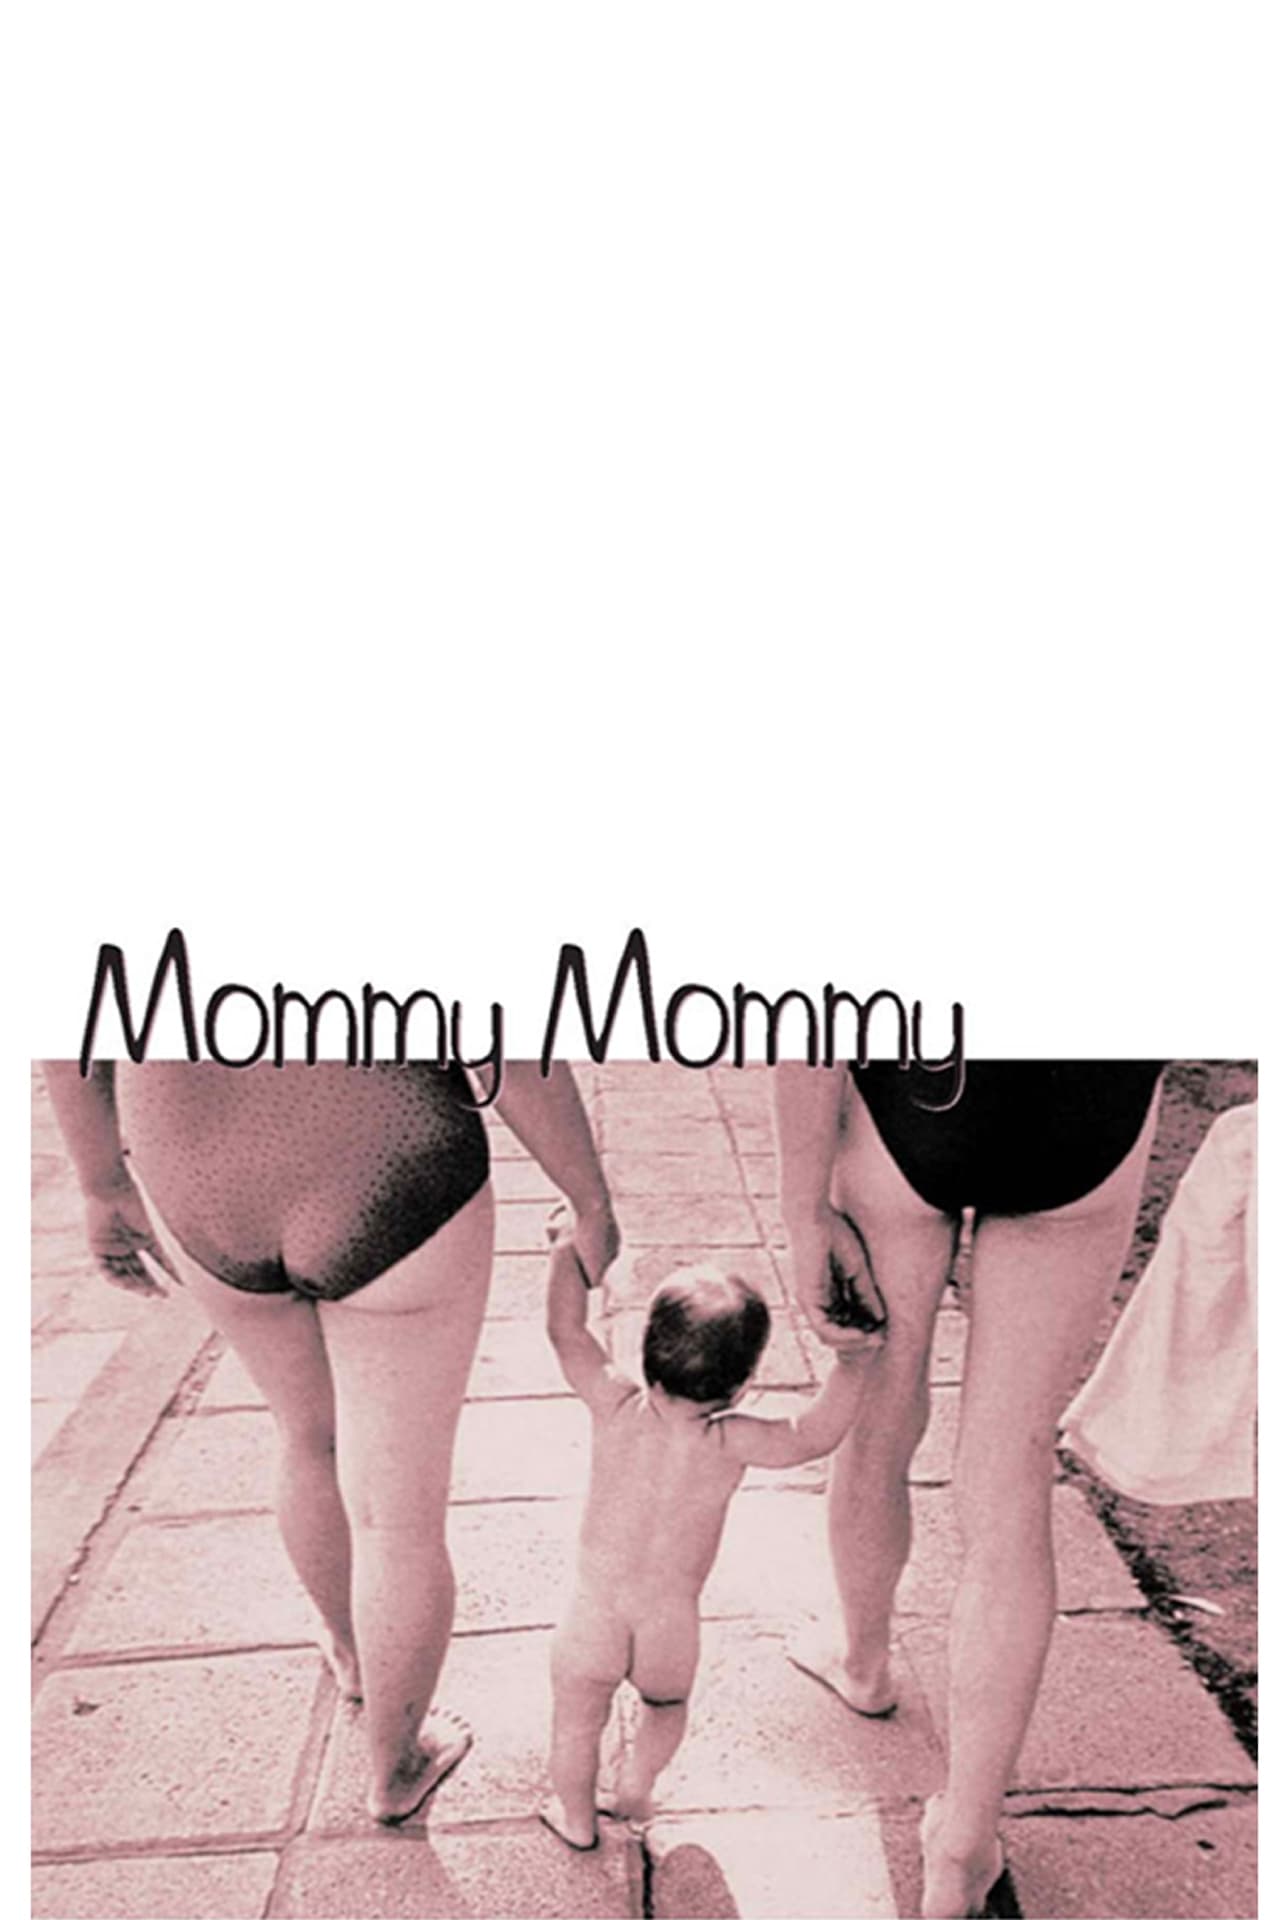 Mommy, Mommy